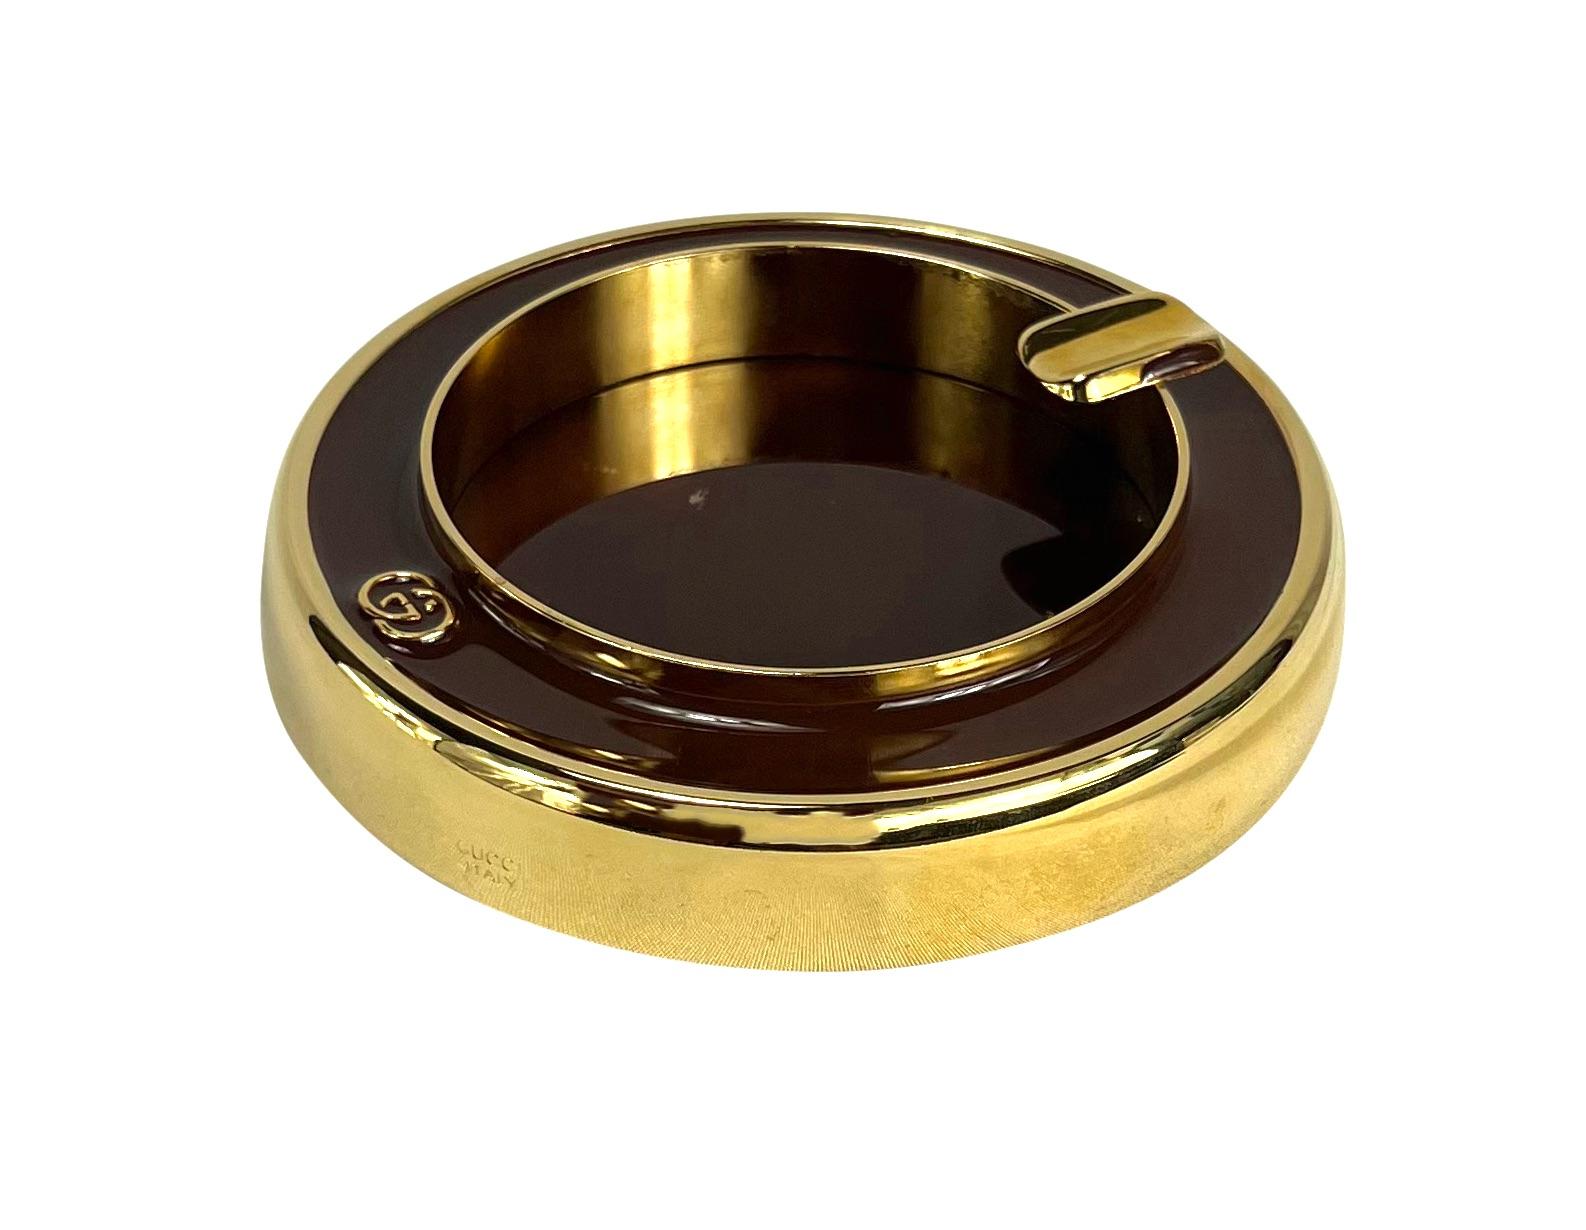 TheRealList presents: a stunning gold-tone Gucci ashtray. From the 1960s, this small ashtray is constructed with gold-tone metal and features brown enamel details. The ashtray is made complete with Gucci's famous 'GG' logo placed on top. 

Follow us